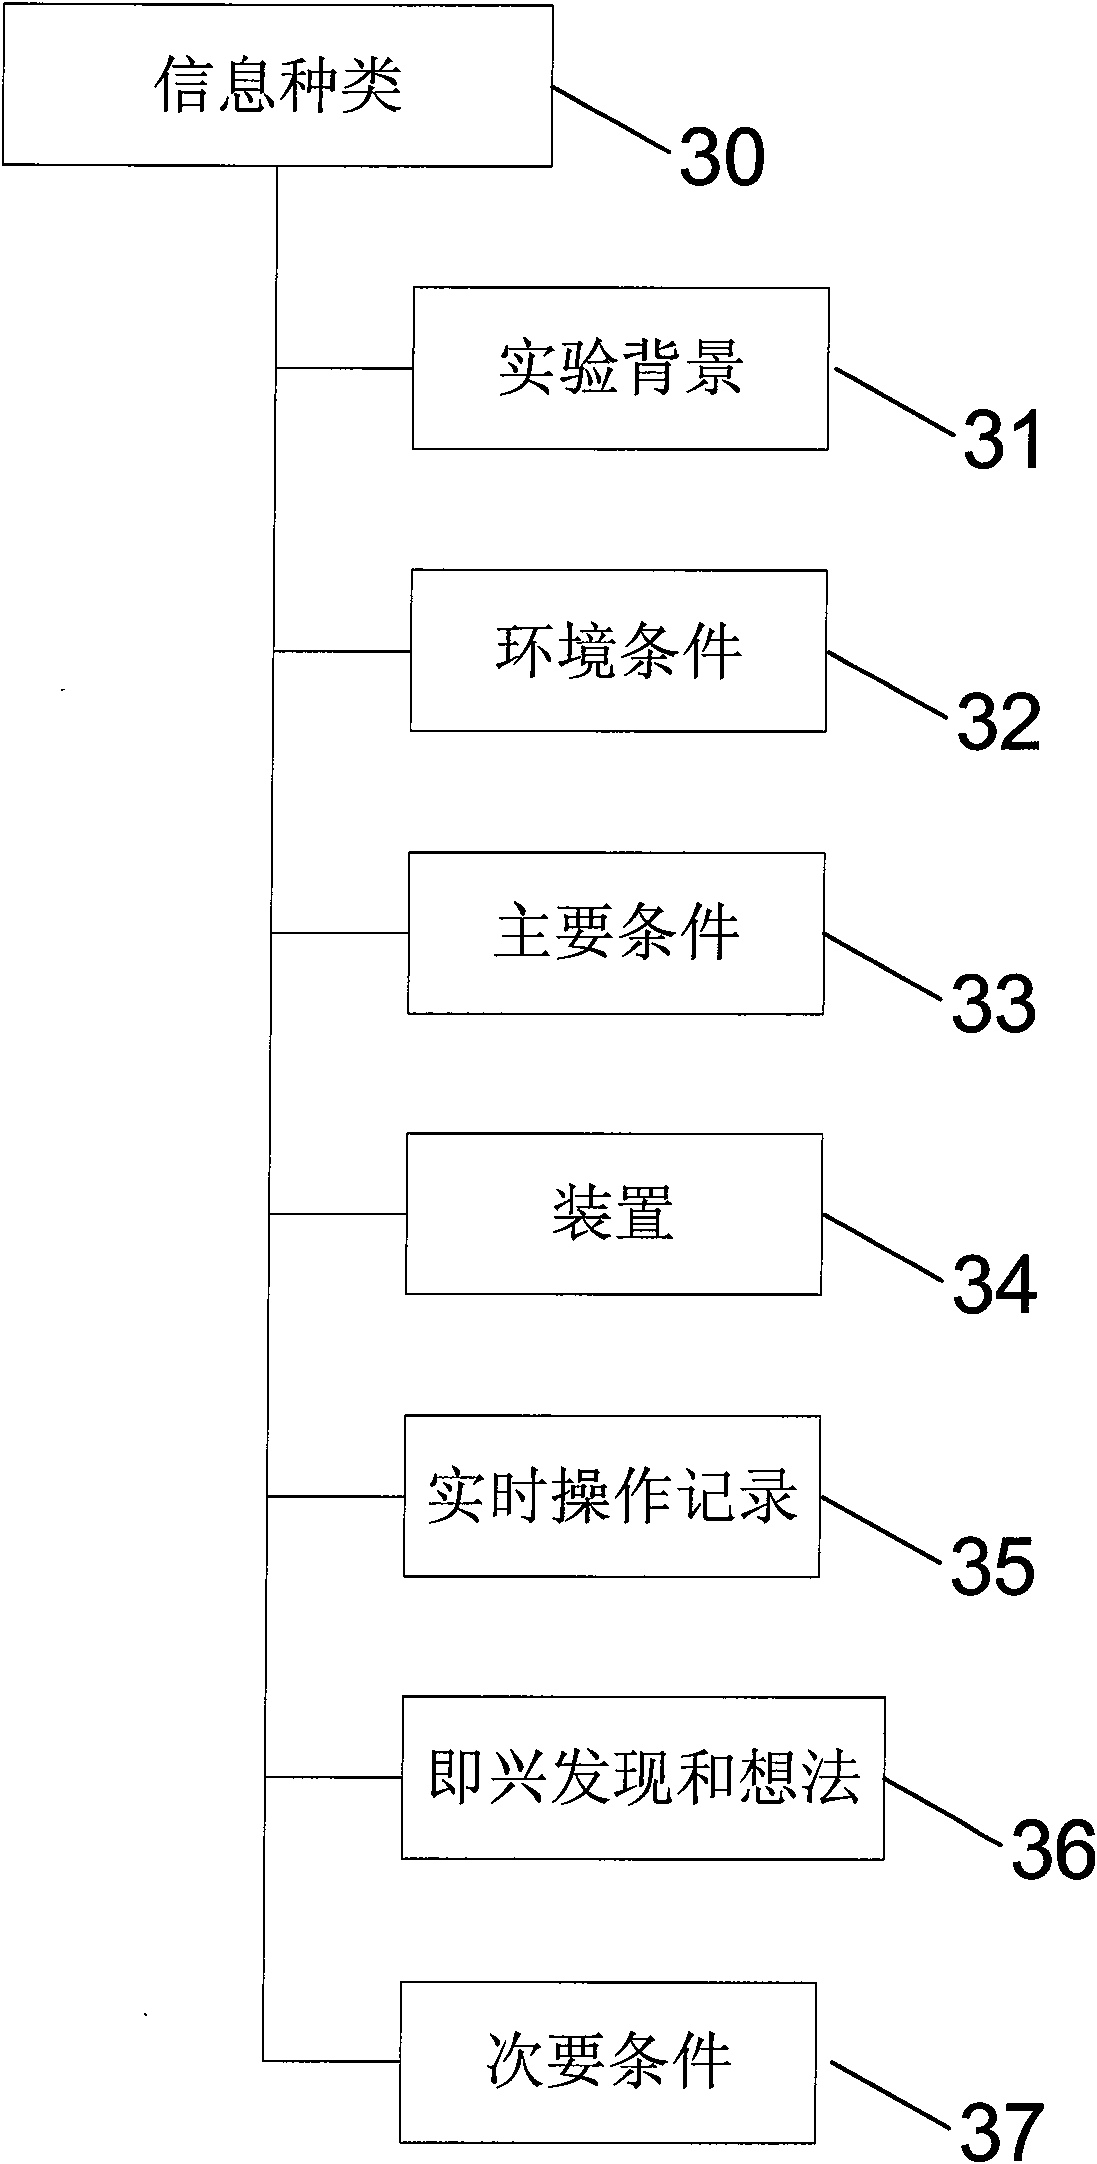 Voice record for experiment and used system and method